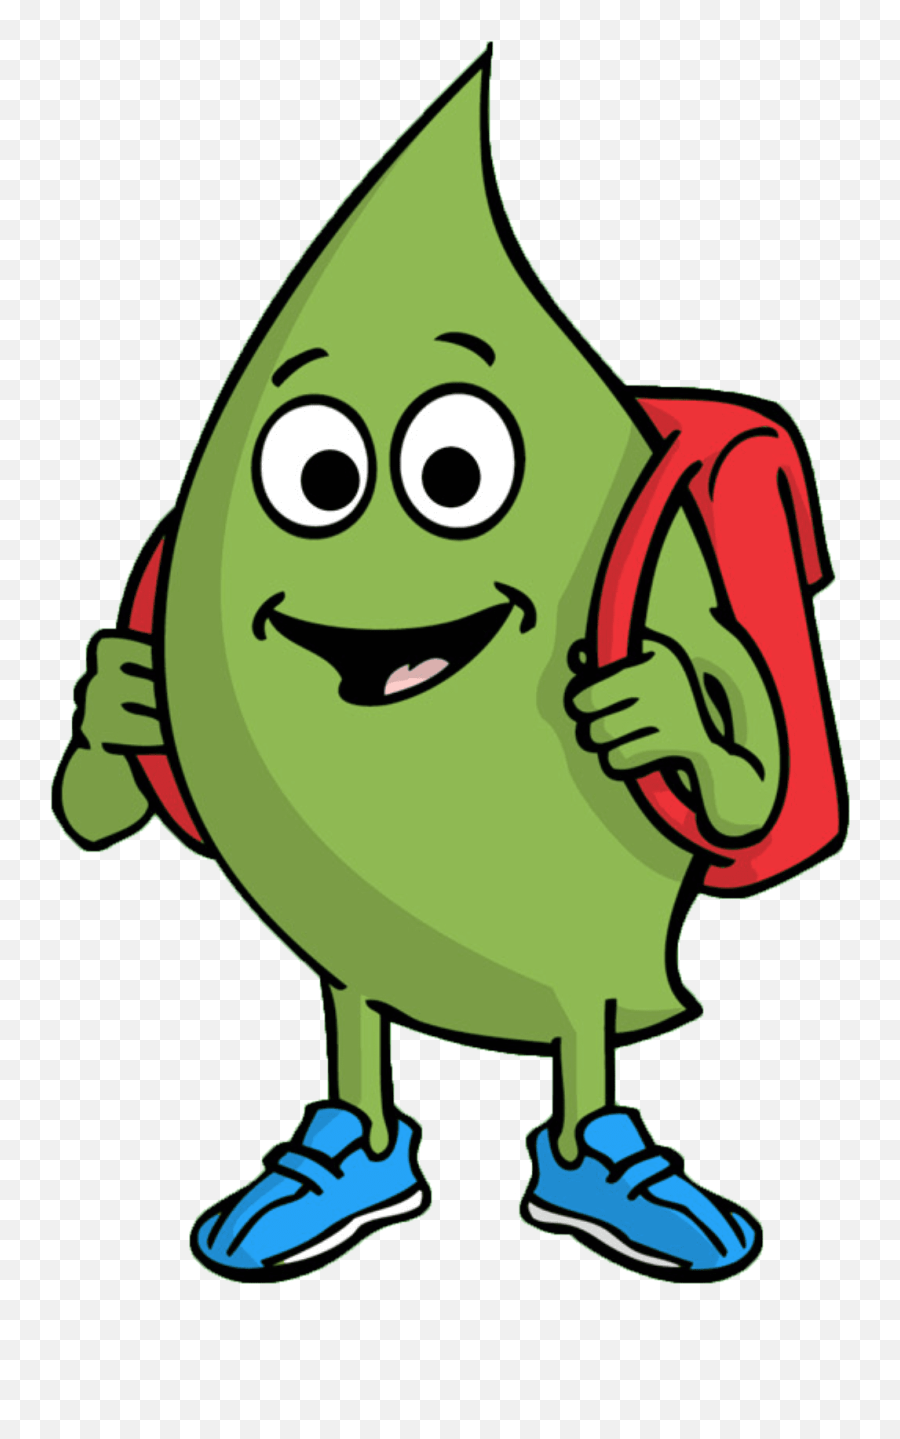 Spencer The Sprout U2013 Prince Georgeu0027s County Clean And Beautiful Emoji,Sprout Clipart